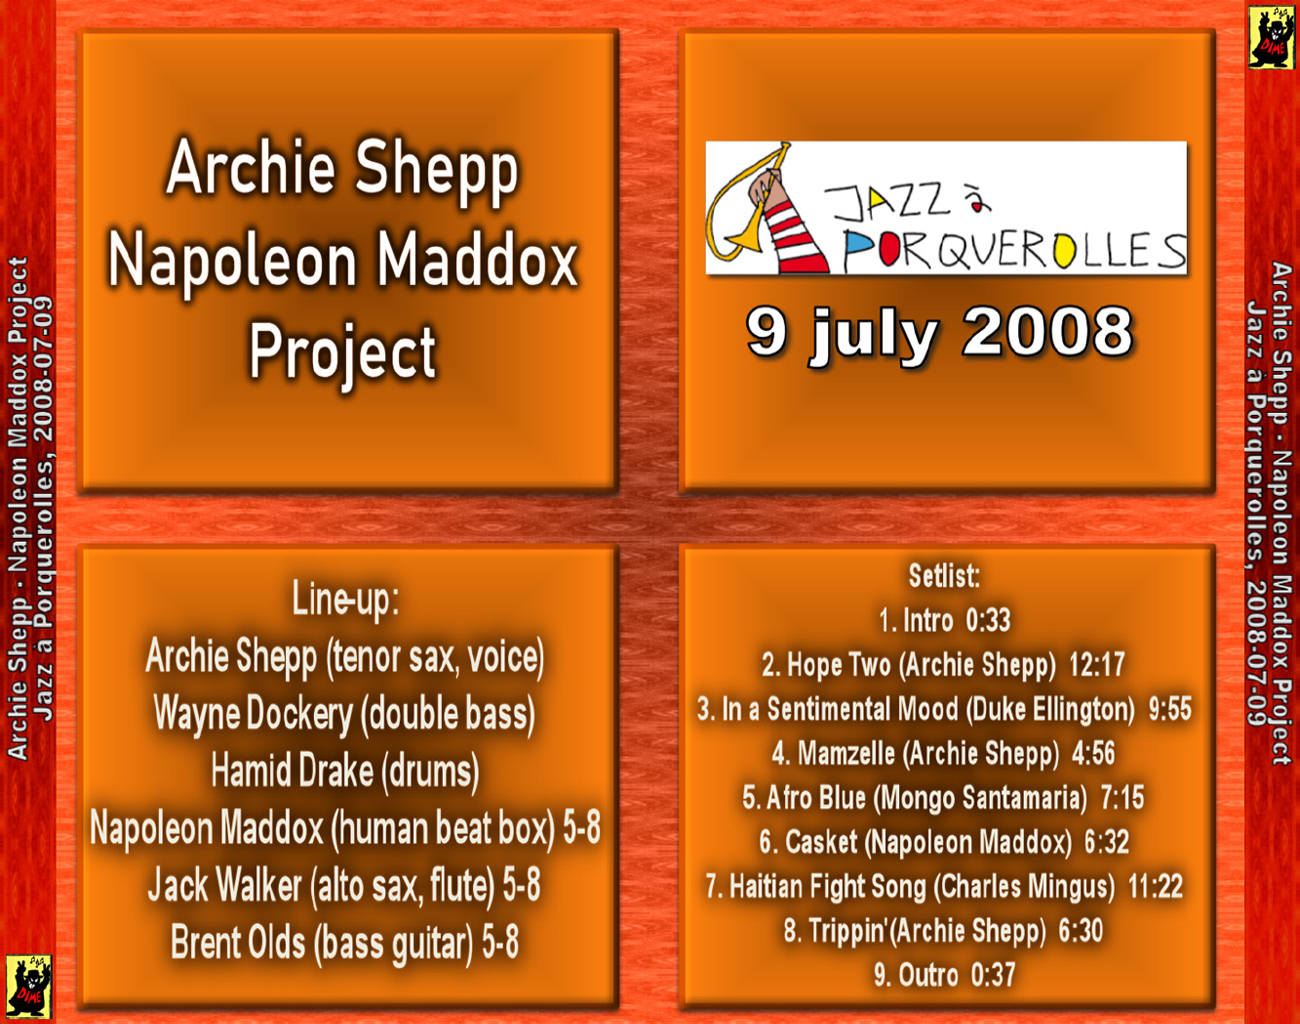 ArchieSheppNapoleonMaddoxProject2008-07-09JazzAPorquerollesFrance (1).png